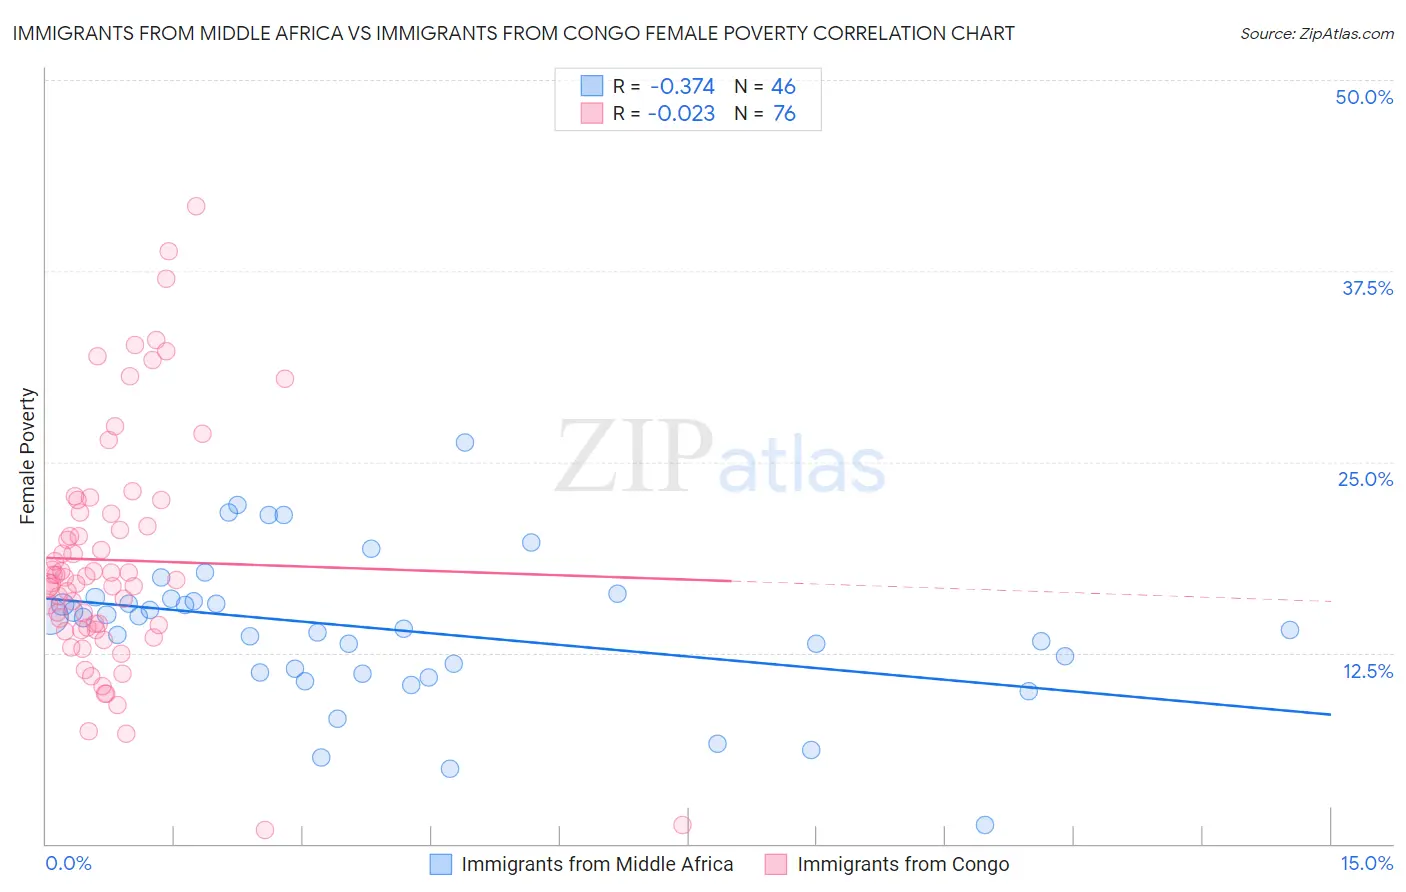 Immigrants from Middle Africa vs Immigrants from Congo Female Poverty